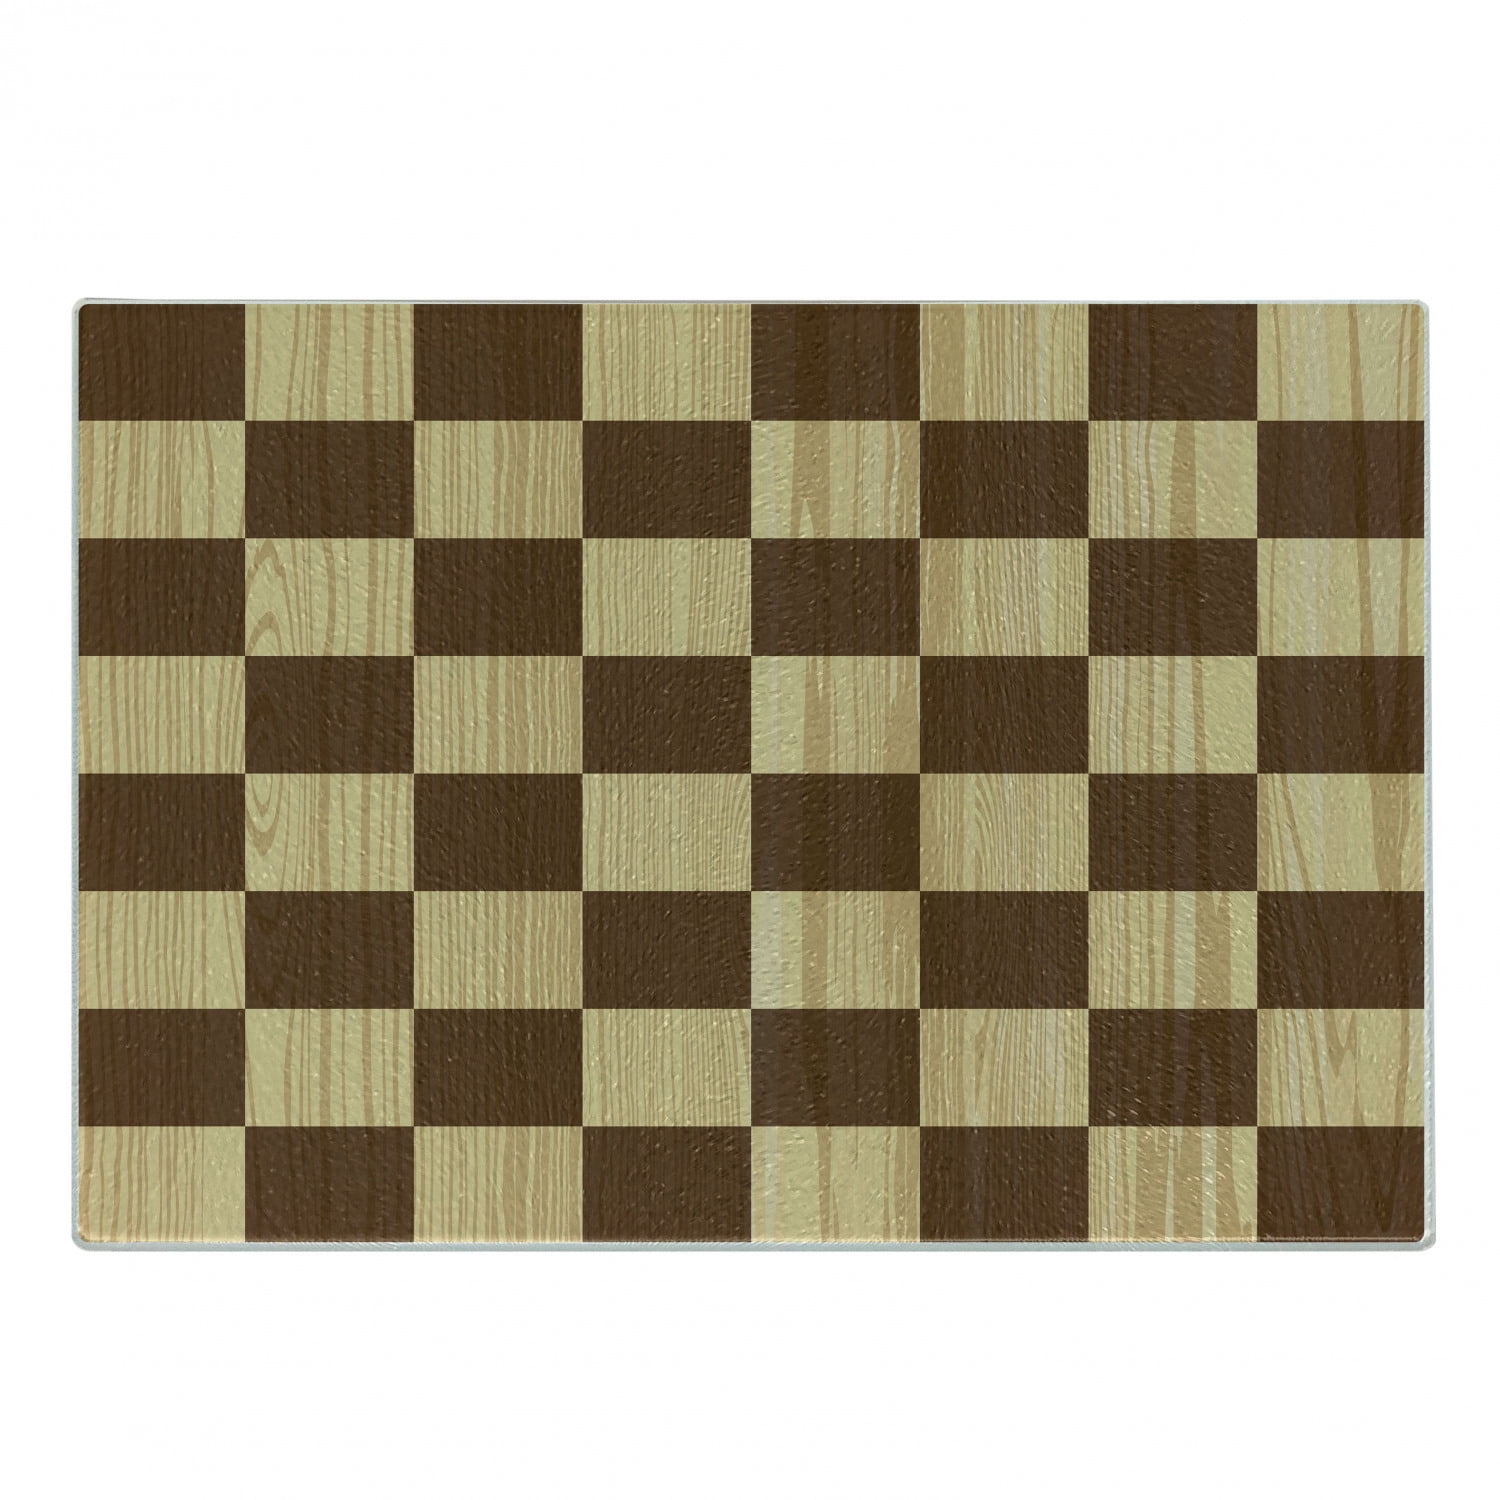 Checkered Cutting Board, Empty Checkerboard Wooden Seem Mosaic Texture Image Chess Game Hobby Theme, Decorative Tempered Glass Cutting and Serving